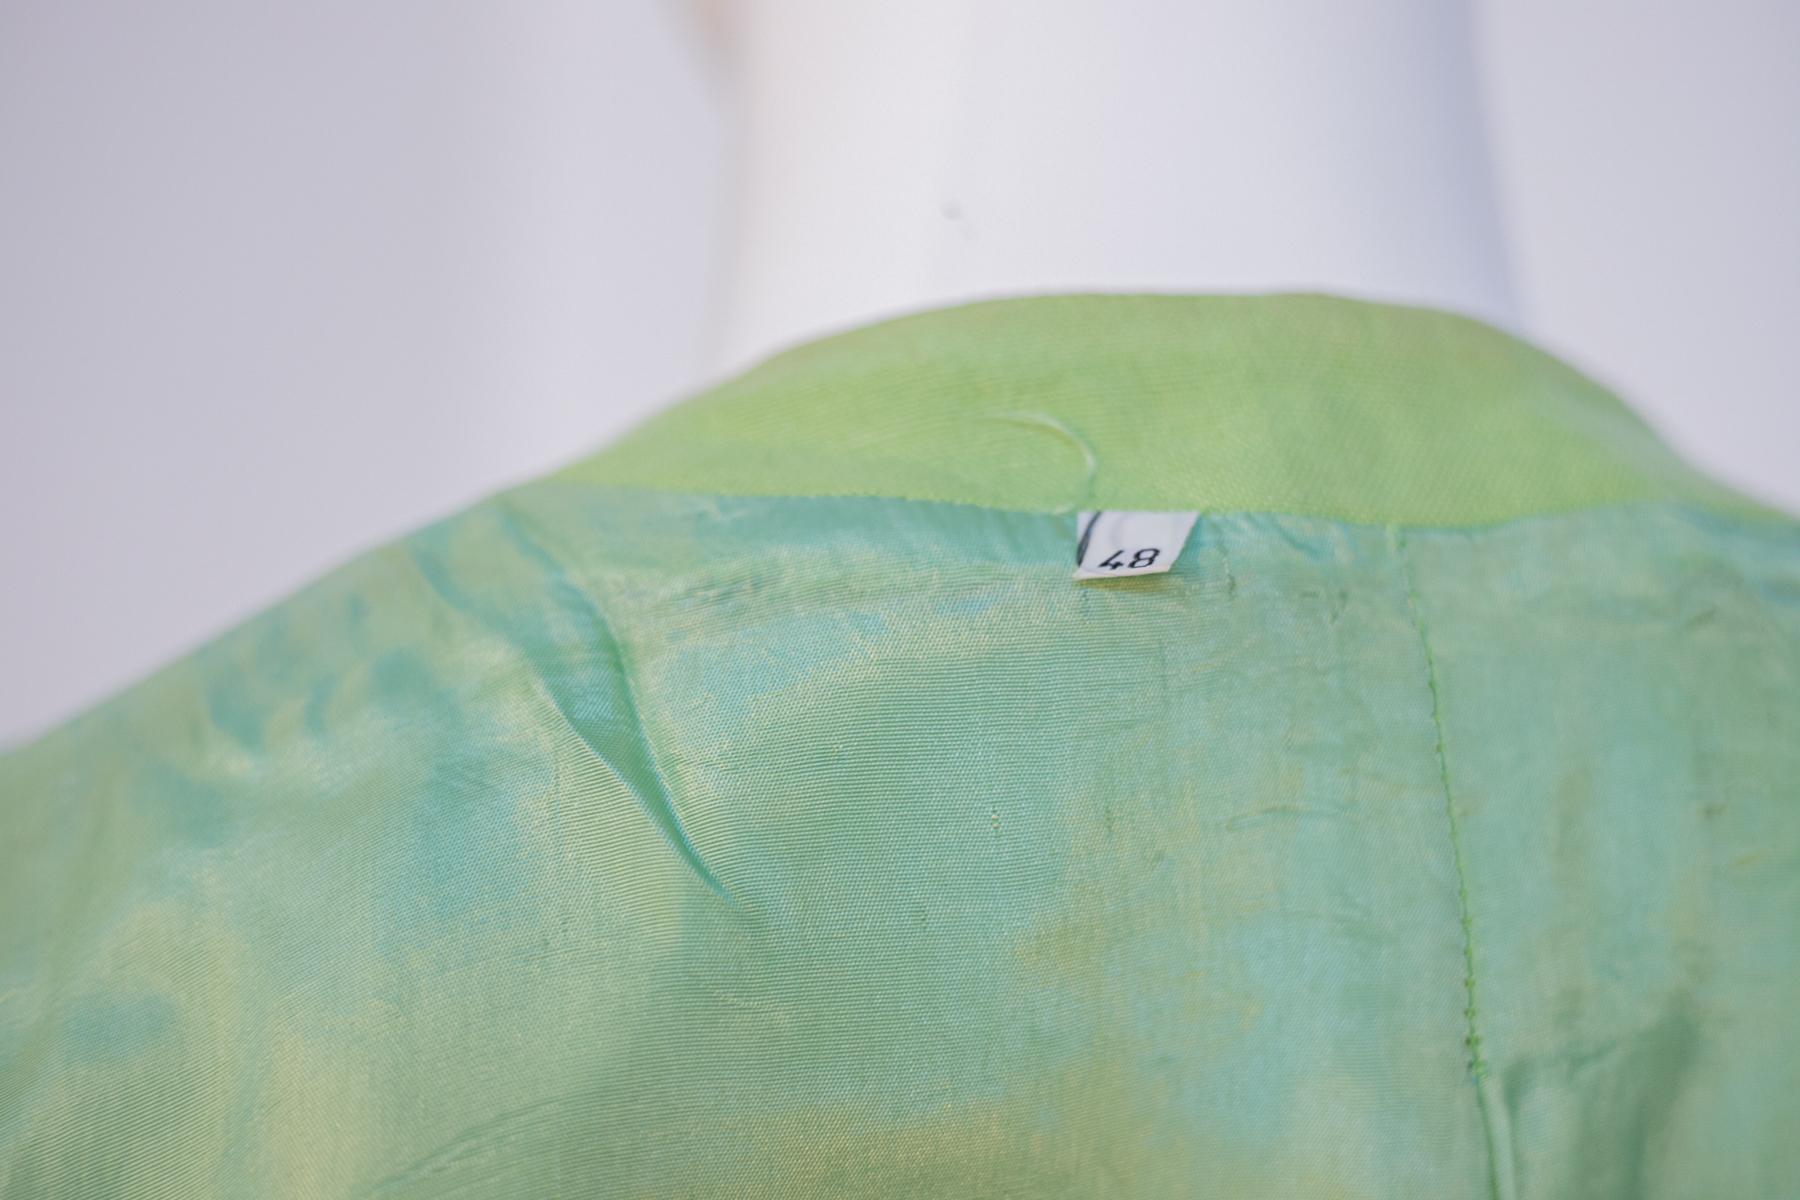 Beautiful stylish linen suit from the 1990s, made in Italy.
The suit is totally pea green linen and has short sleeves with soft cuffs.
The collar has a classic compound U cut. There are 5 gold and green buttons, suitable for fastening.
Under the